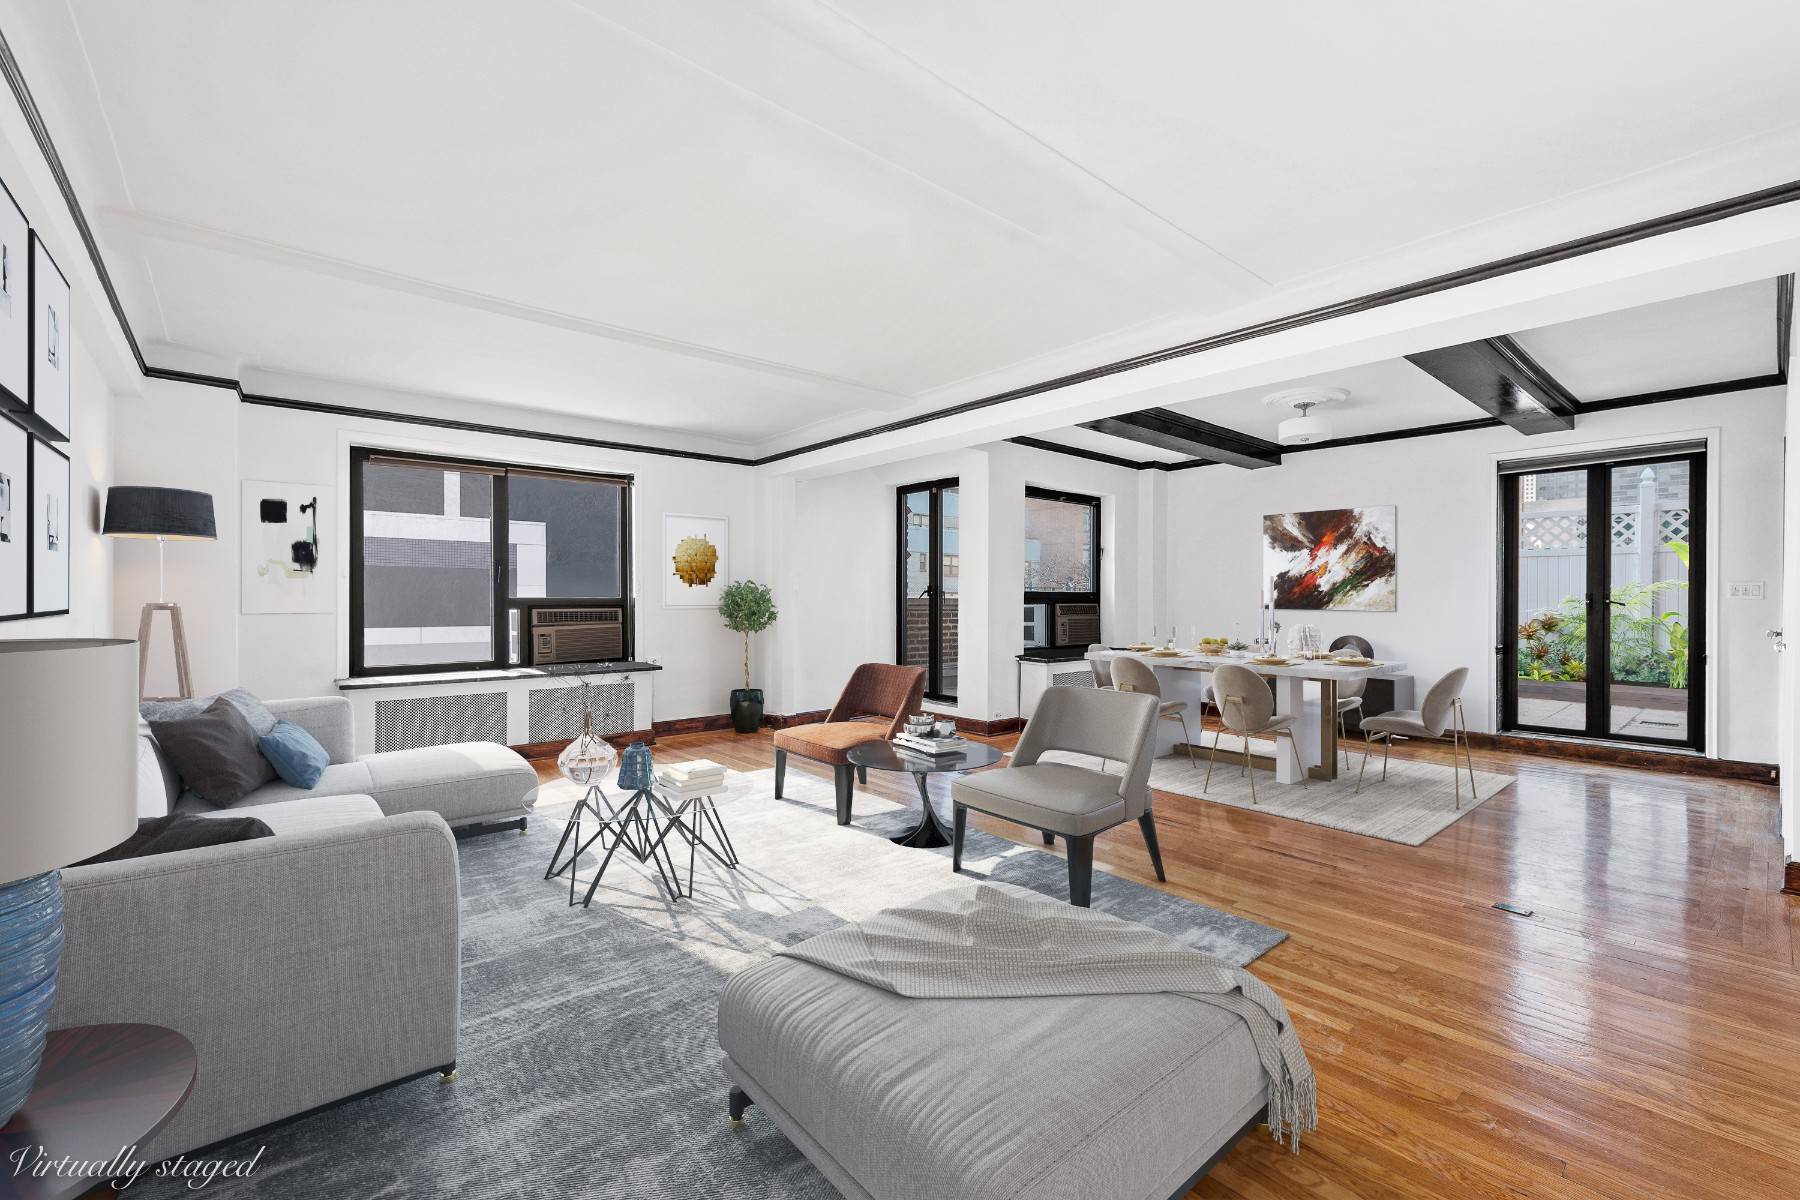 Built in 1930 and located in Sutton Place on East 57th Street, one of the citys most affluent streets known for its upscale and elegant co op apartments, this pre ...